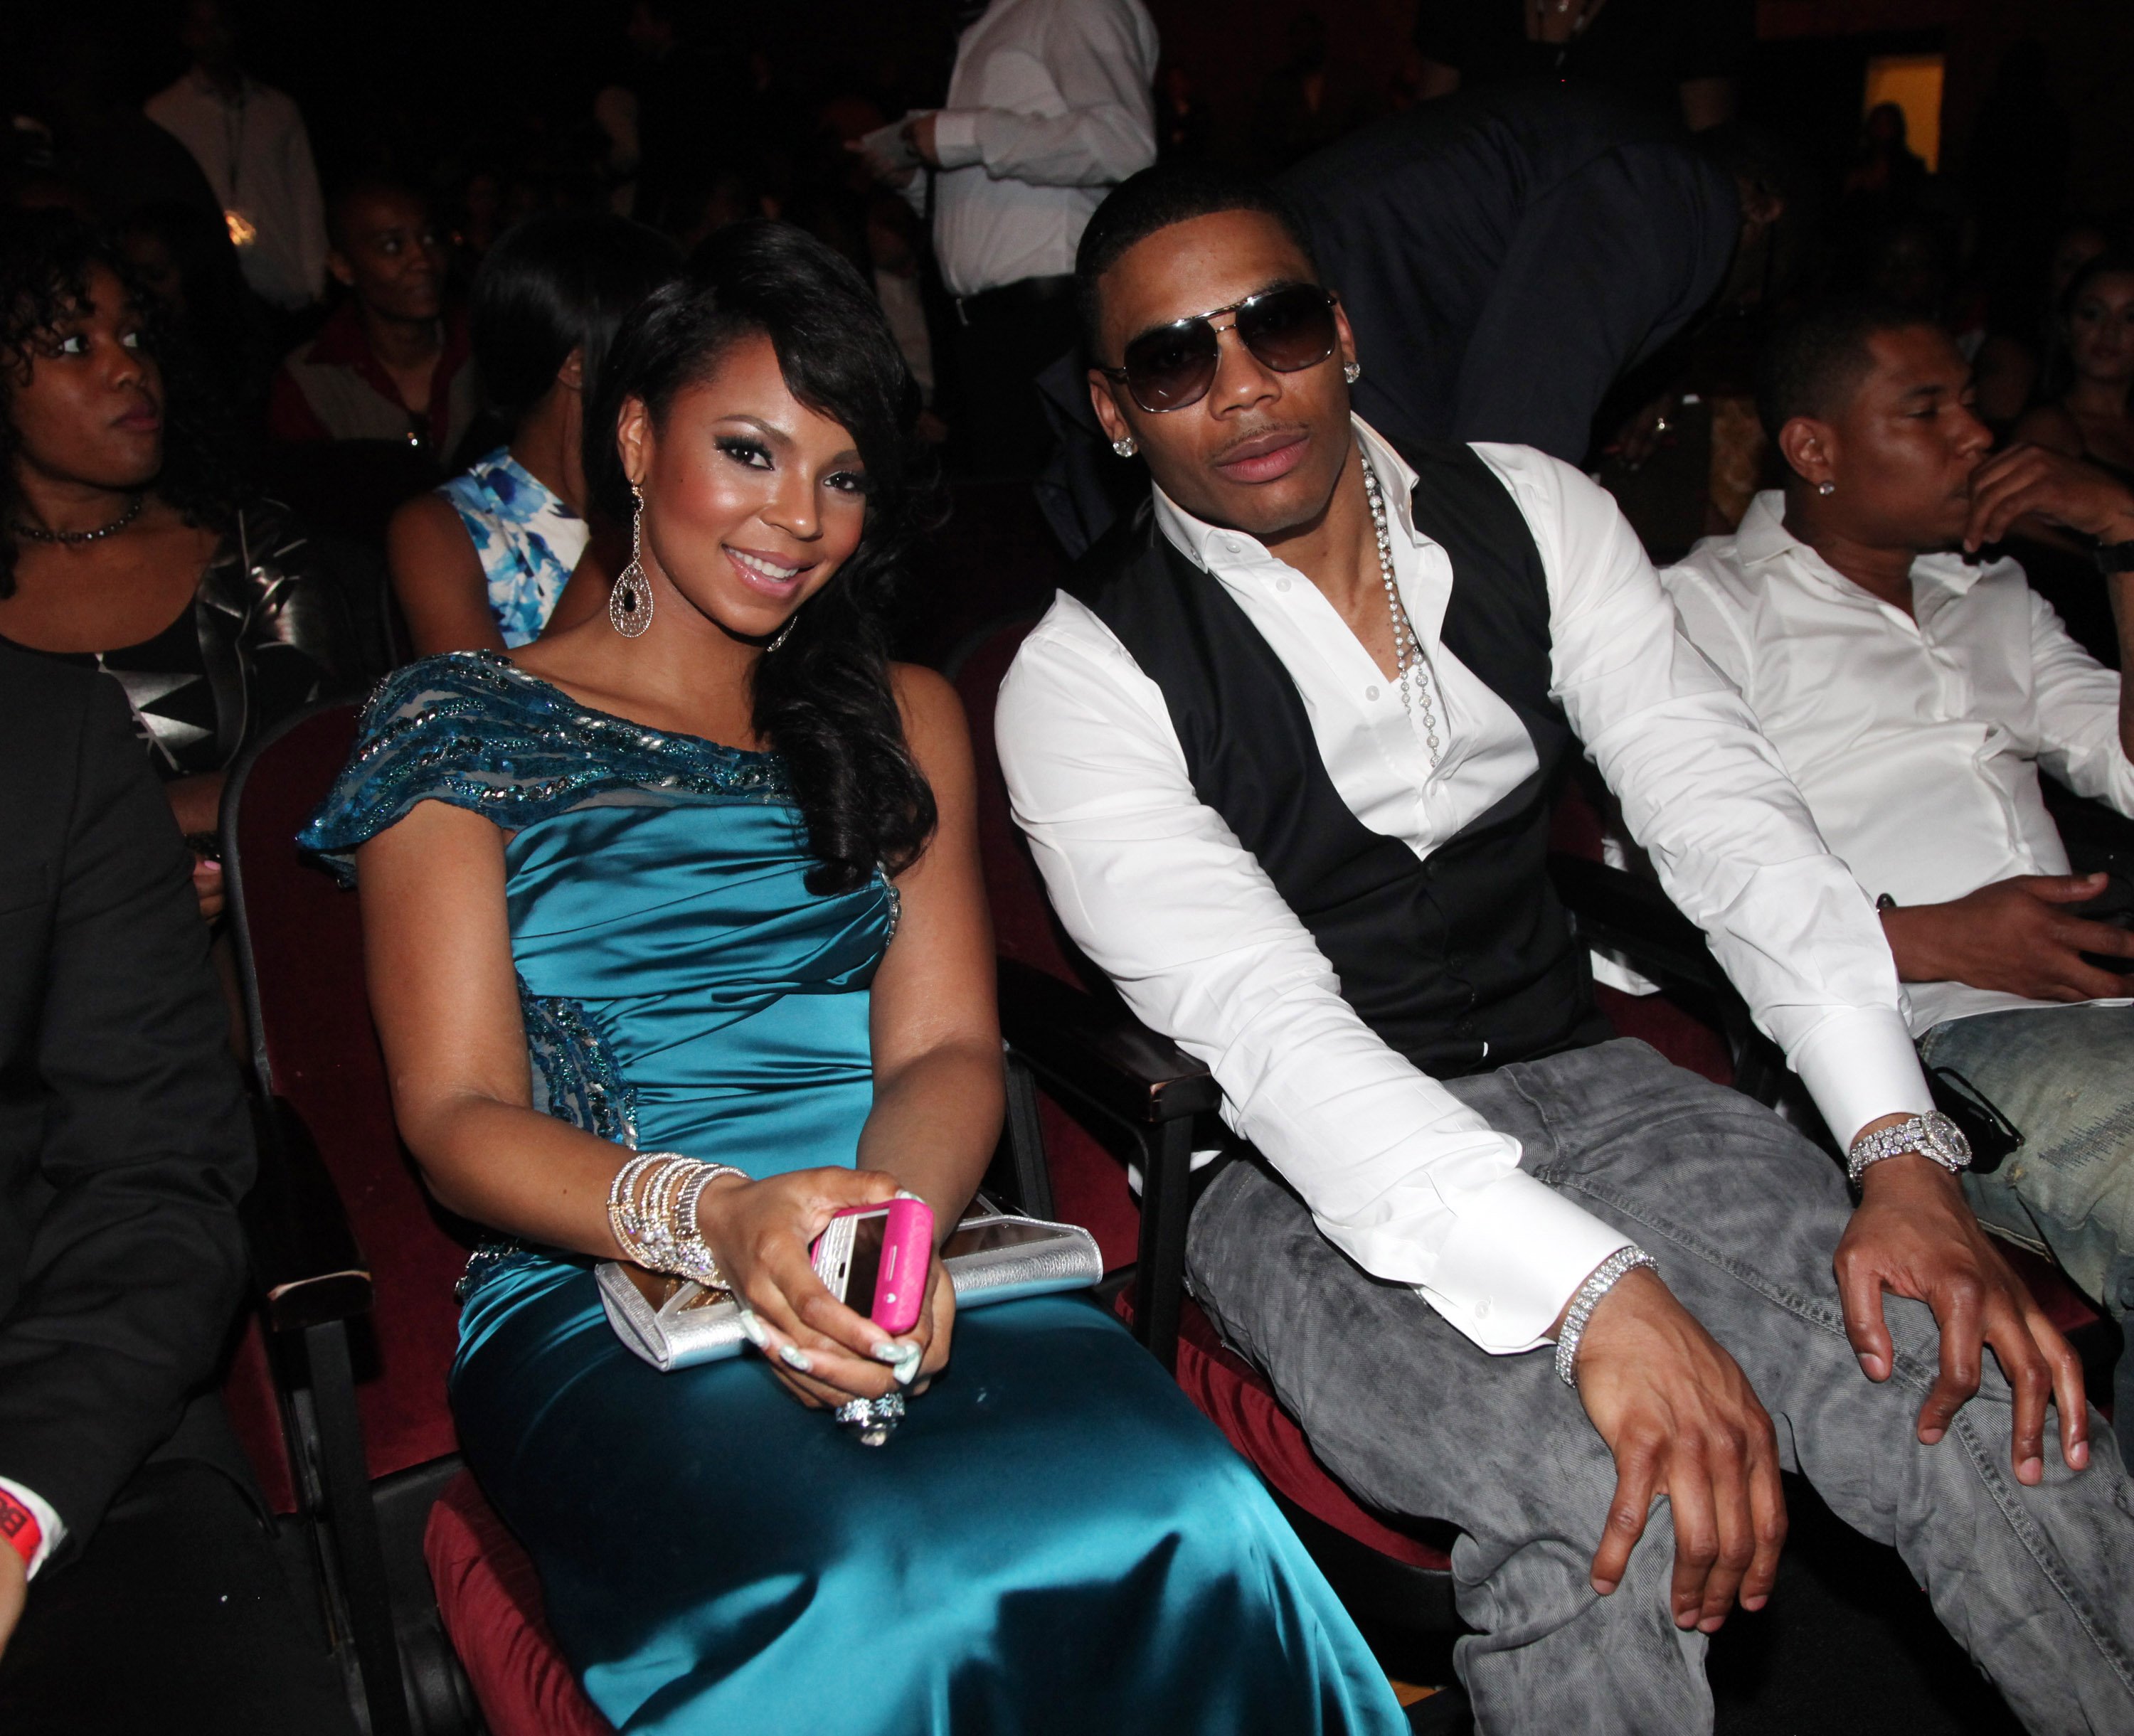 Ashanti and Nelly at the 2011 BET Awards in Los Angeles on June 26, 2011 | Source: Getty Images